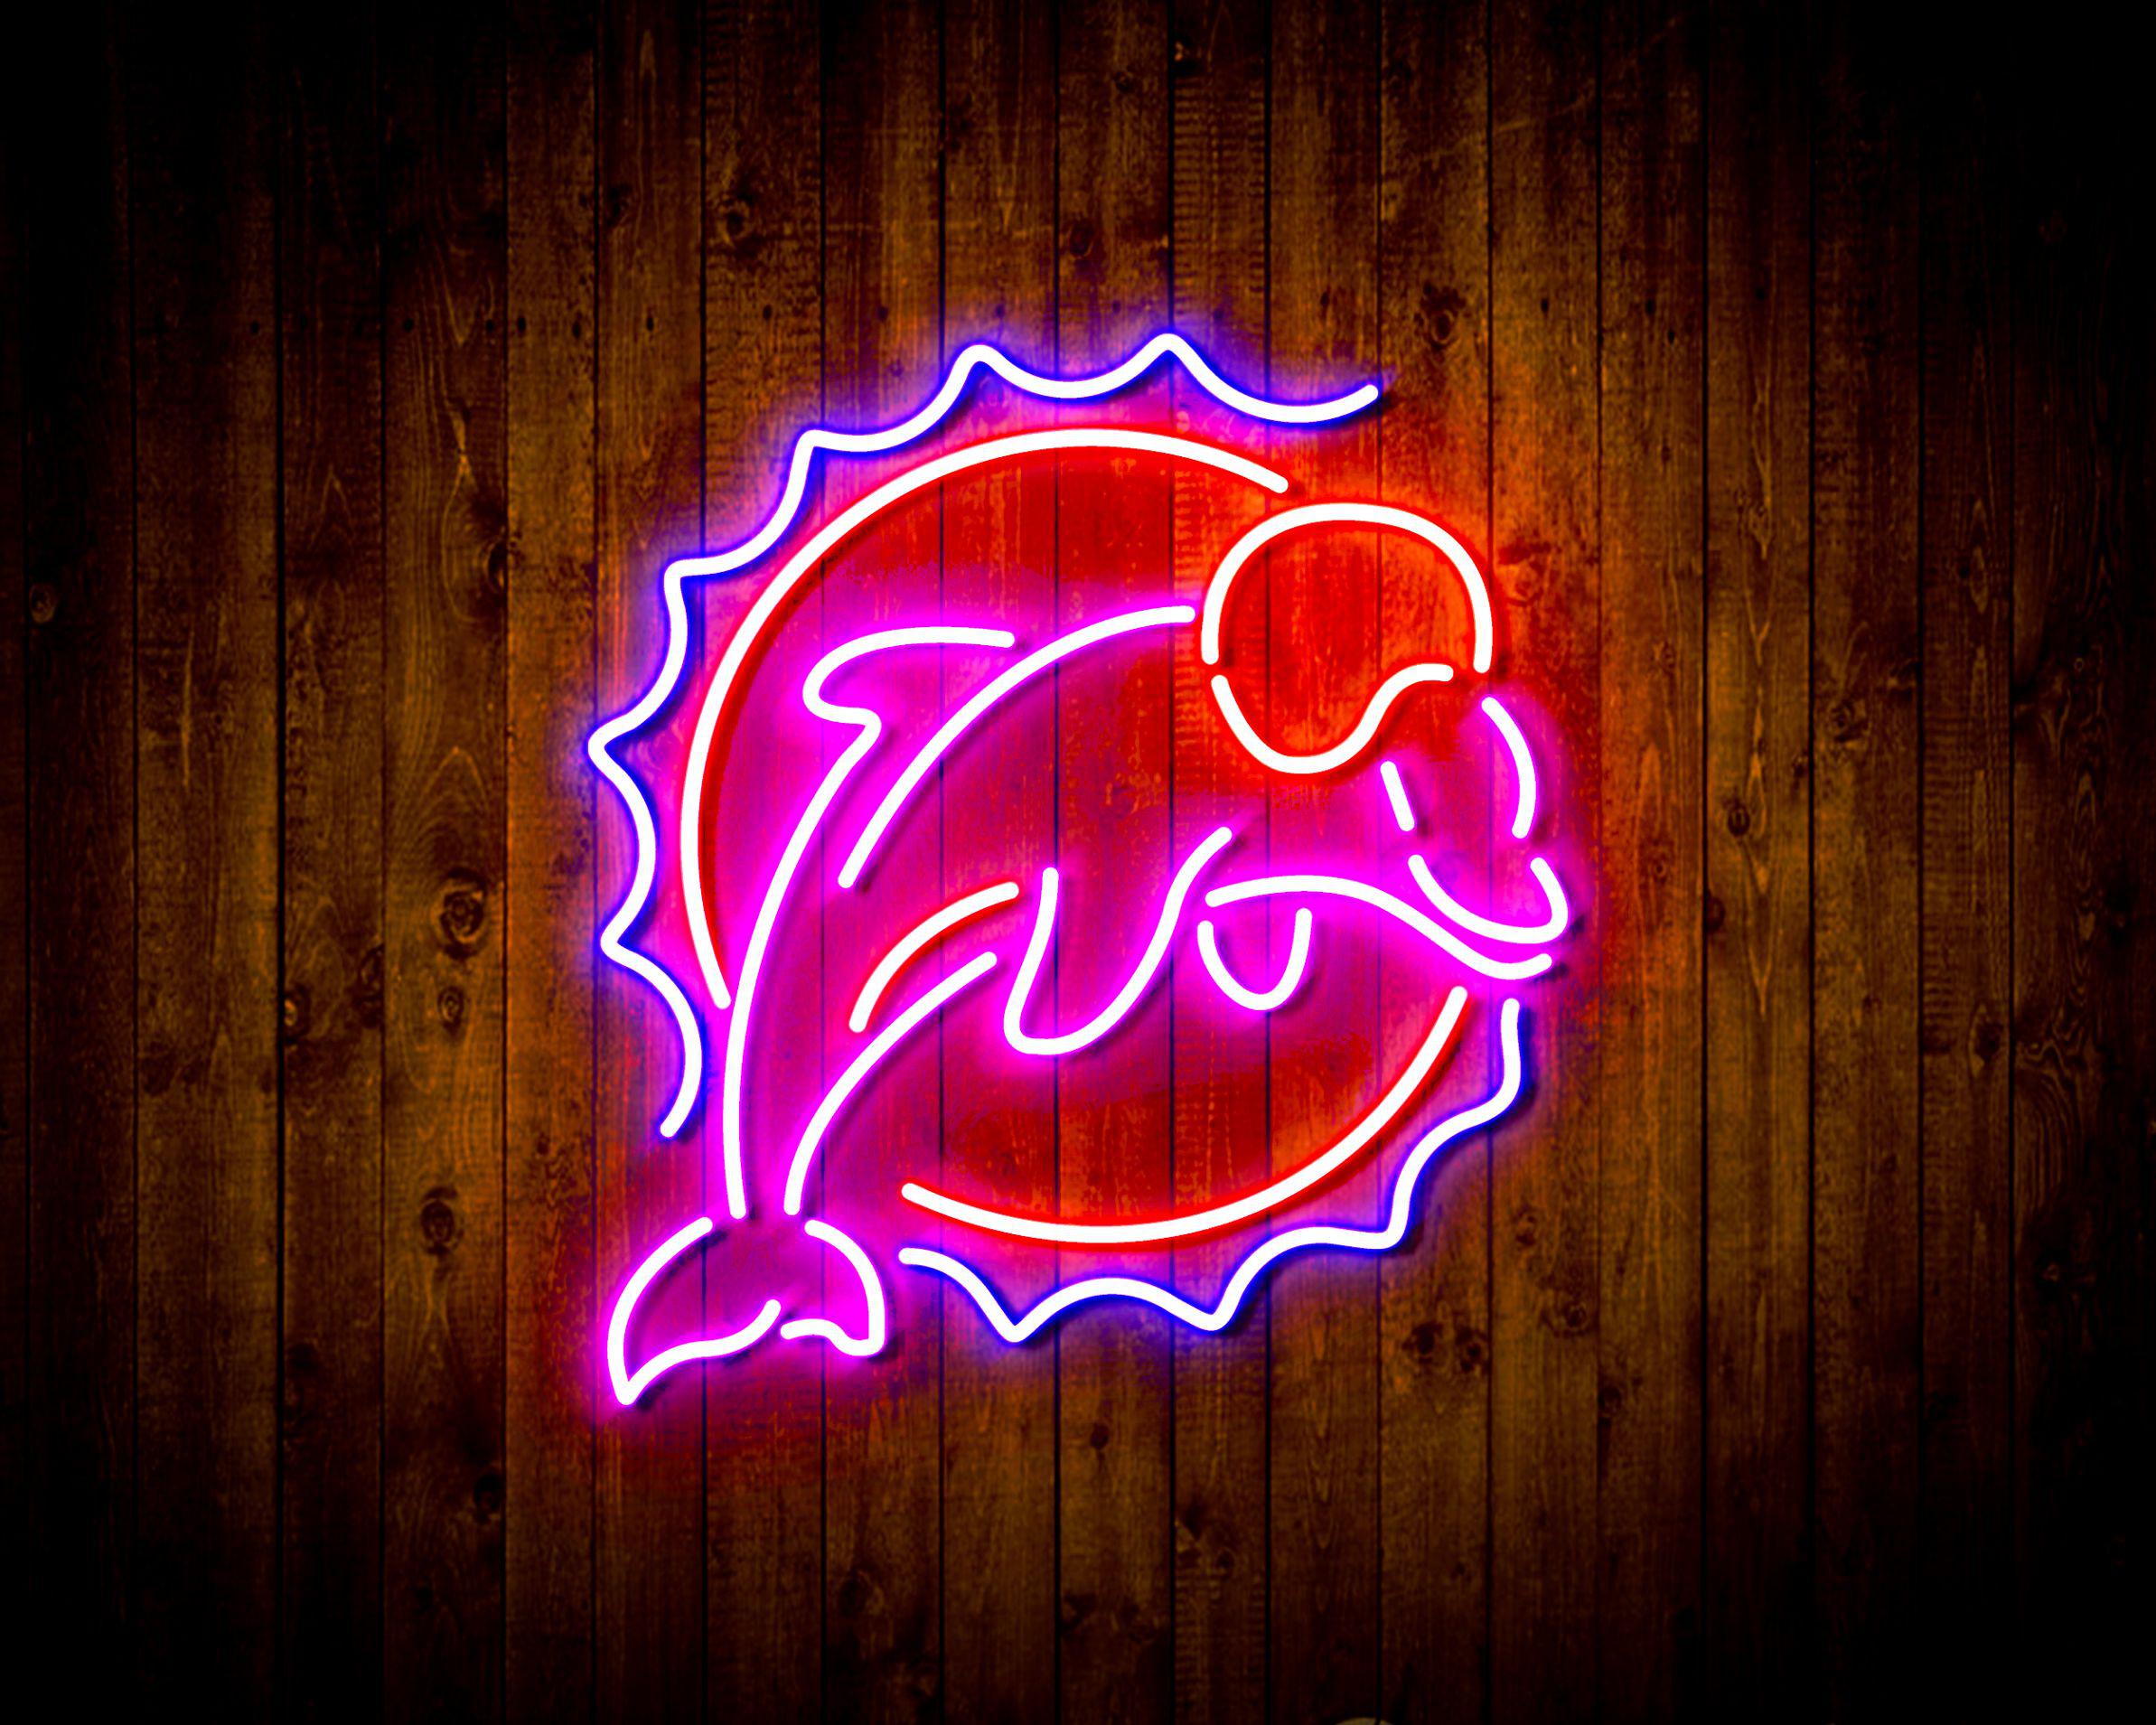 Miami Dolphins Neon-Like Flex LED Sign Multi Color - ProLedSign